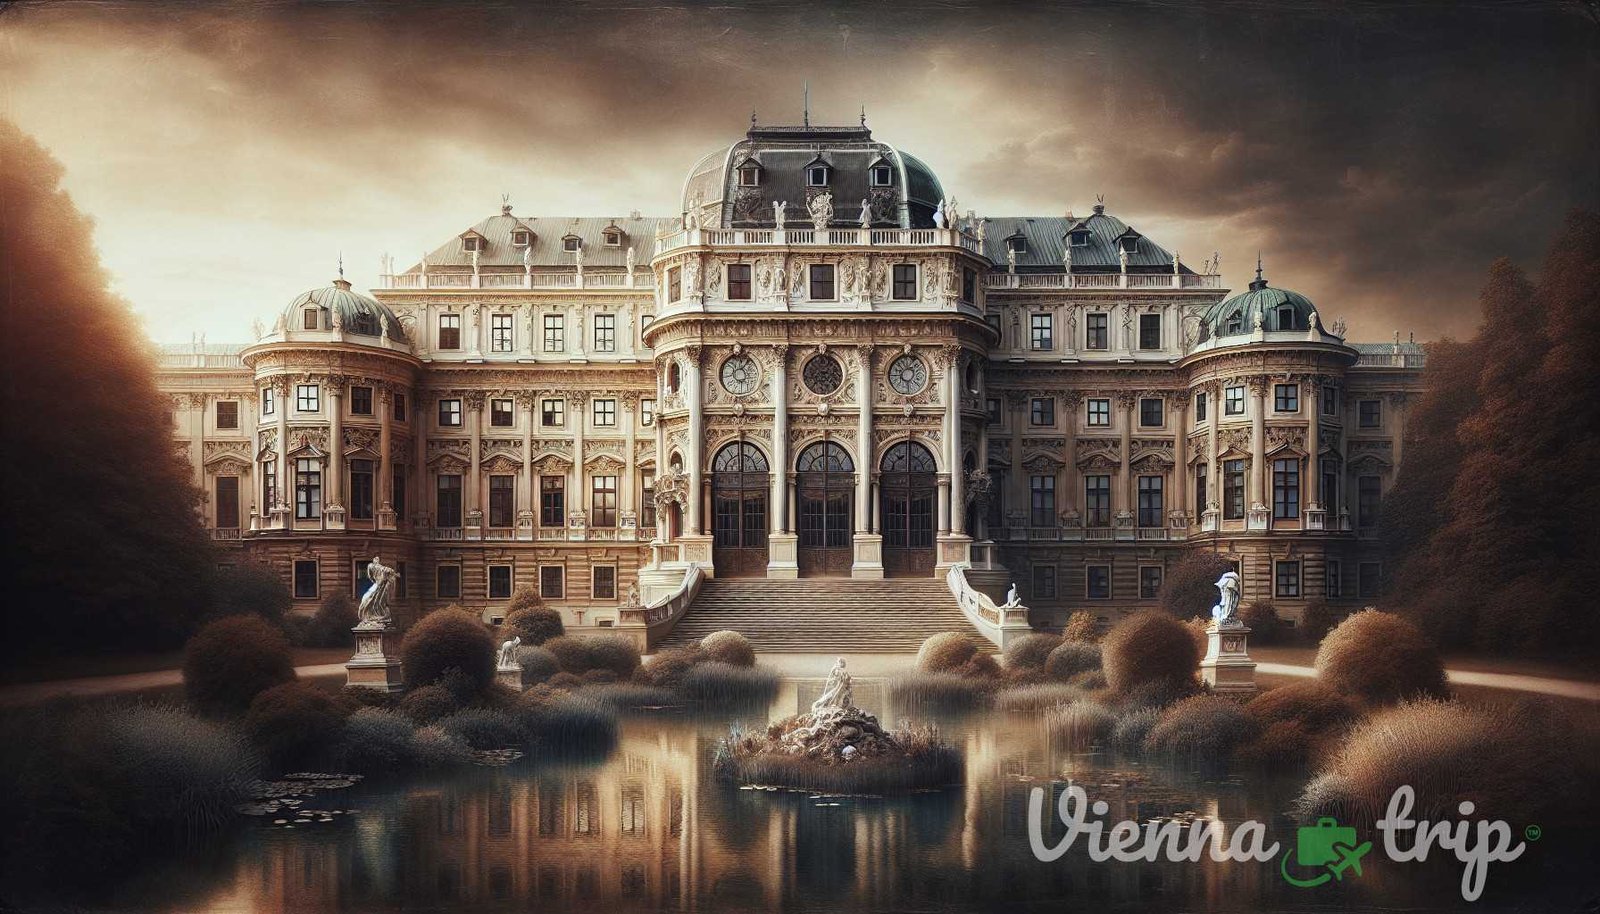 Illustration for section: 2. PALAIS SCHWARZENBERG Continuing on our quest to uncover Vienna's forgotten palatial tales, our ne - viennas forgotten palaces